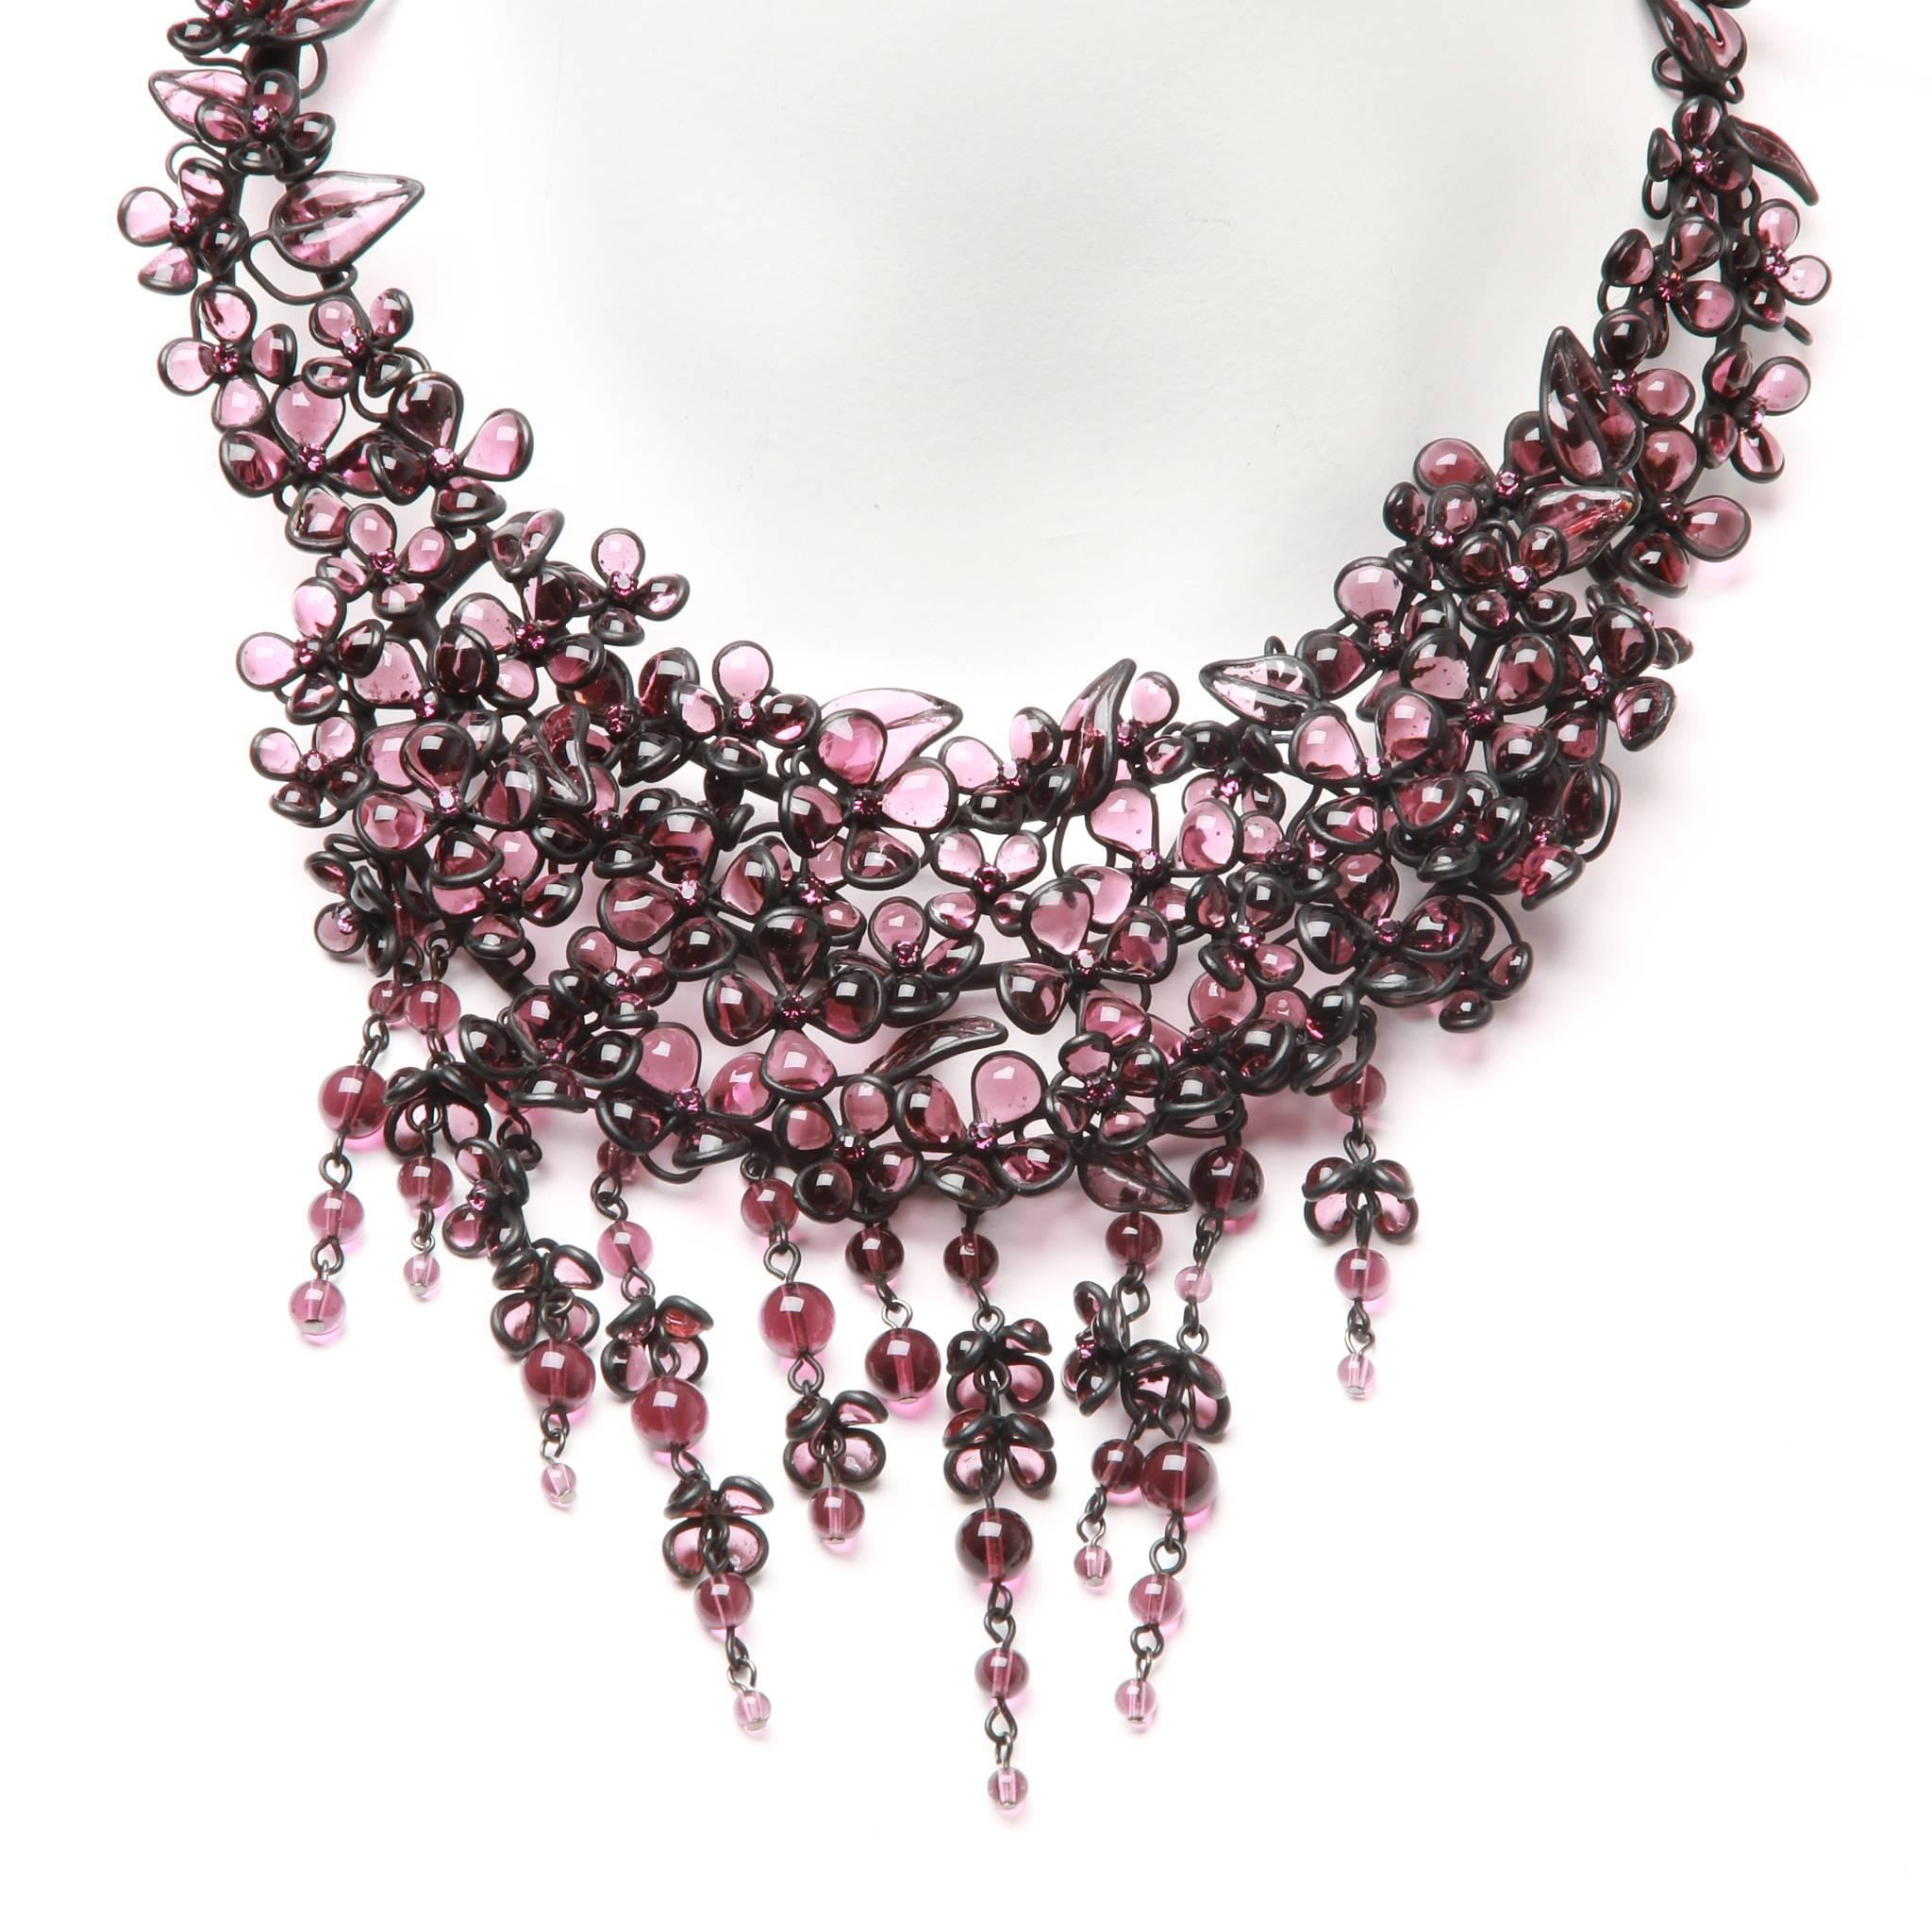 Beautiful Tom Ford necklace formed of intricate black metal and wire work and pate de verre glass in various tones of purple. 

Design features a solid frame with drop bead fringing for movement. Spring clasp closure at back. 